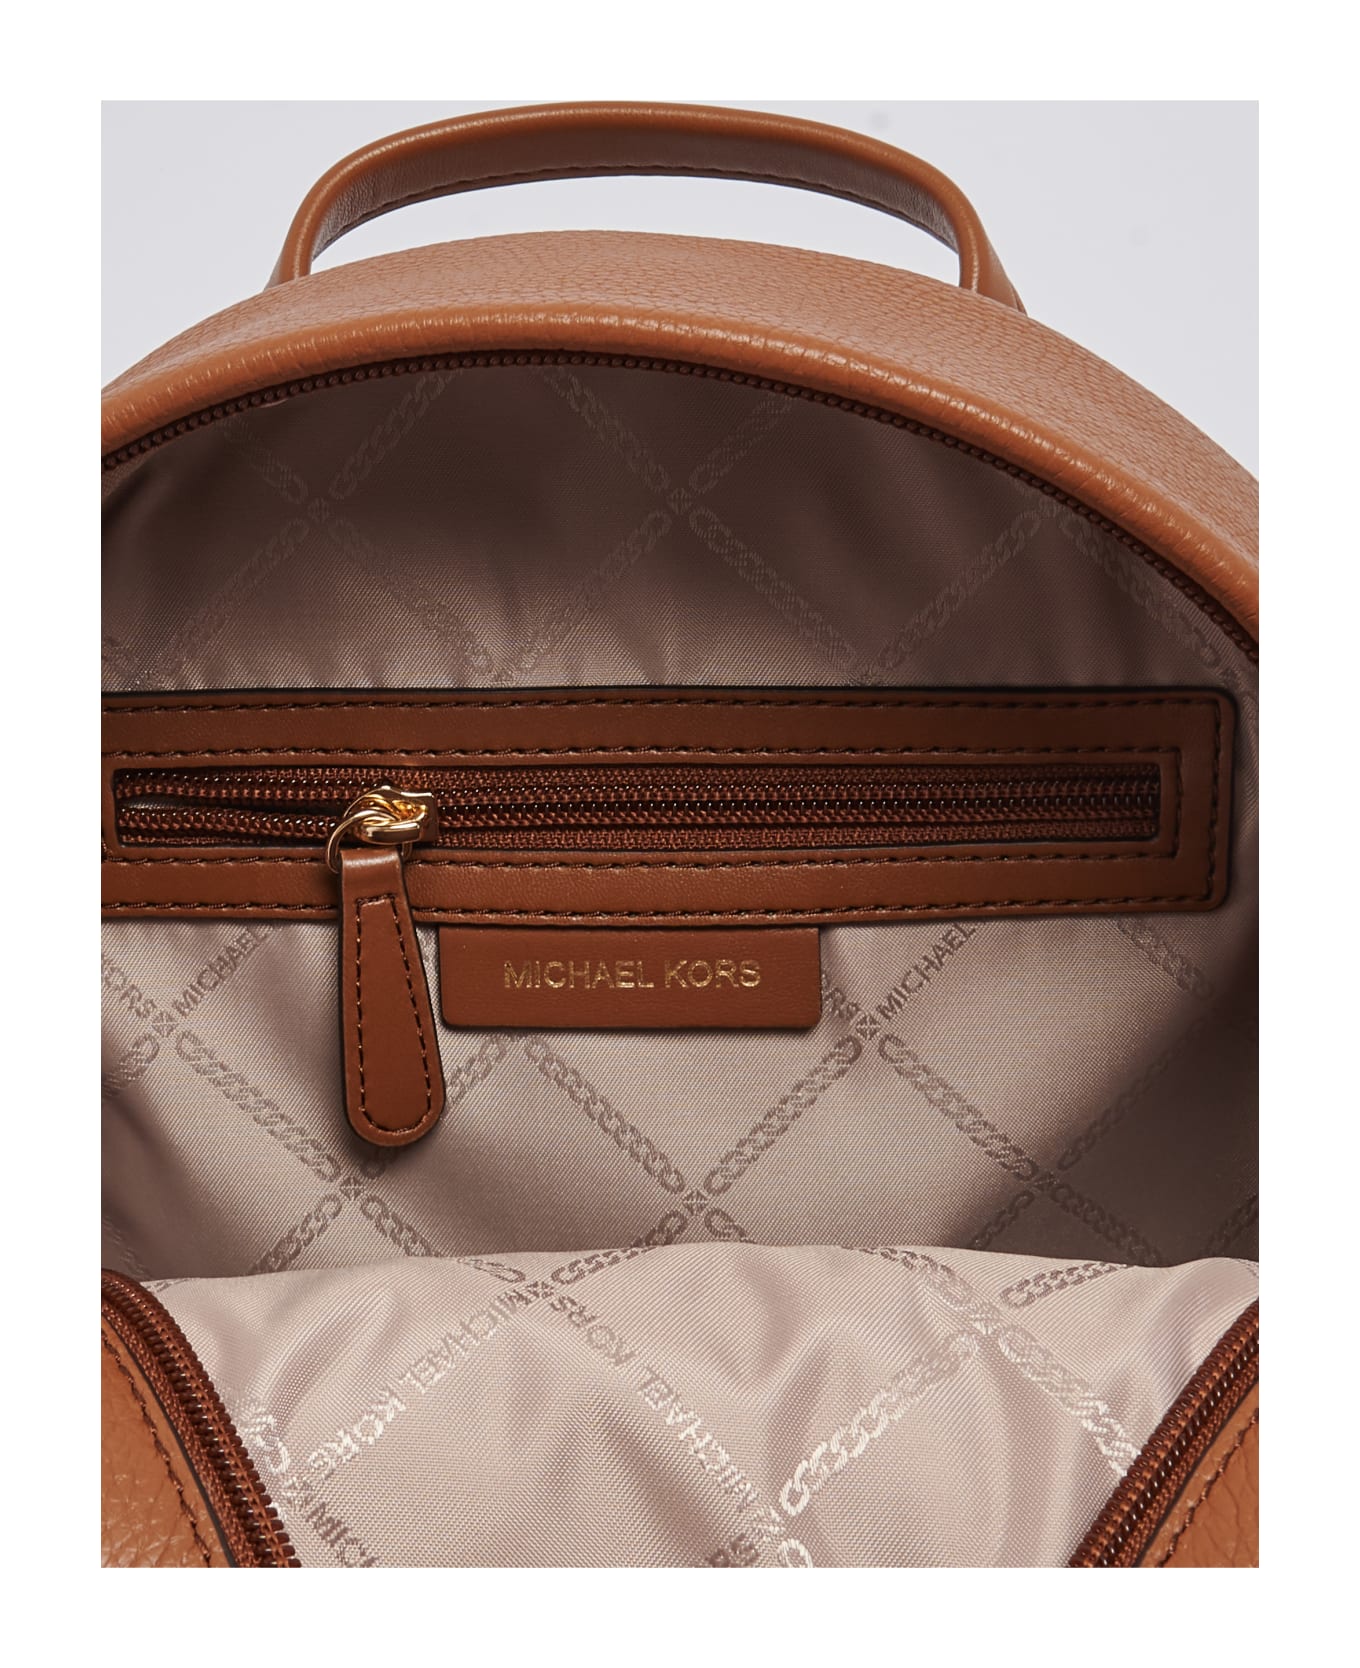 Michael Kors Brown Leather Backpack - CUOIO